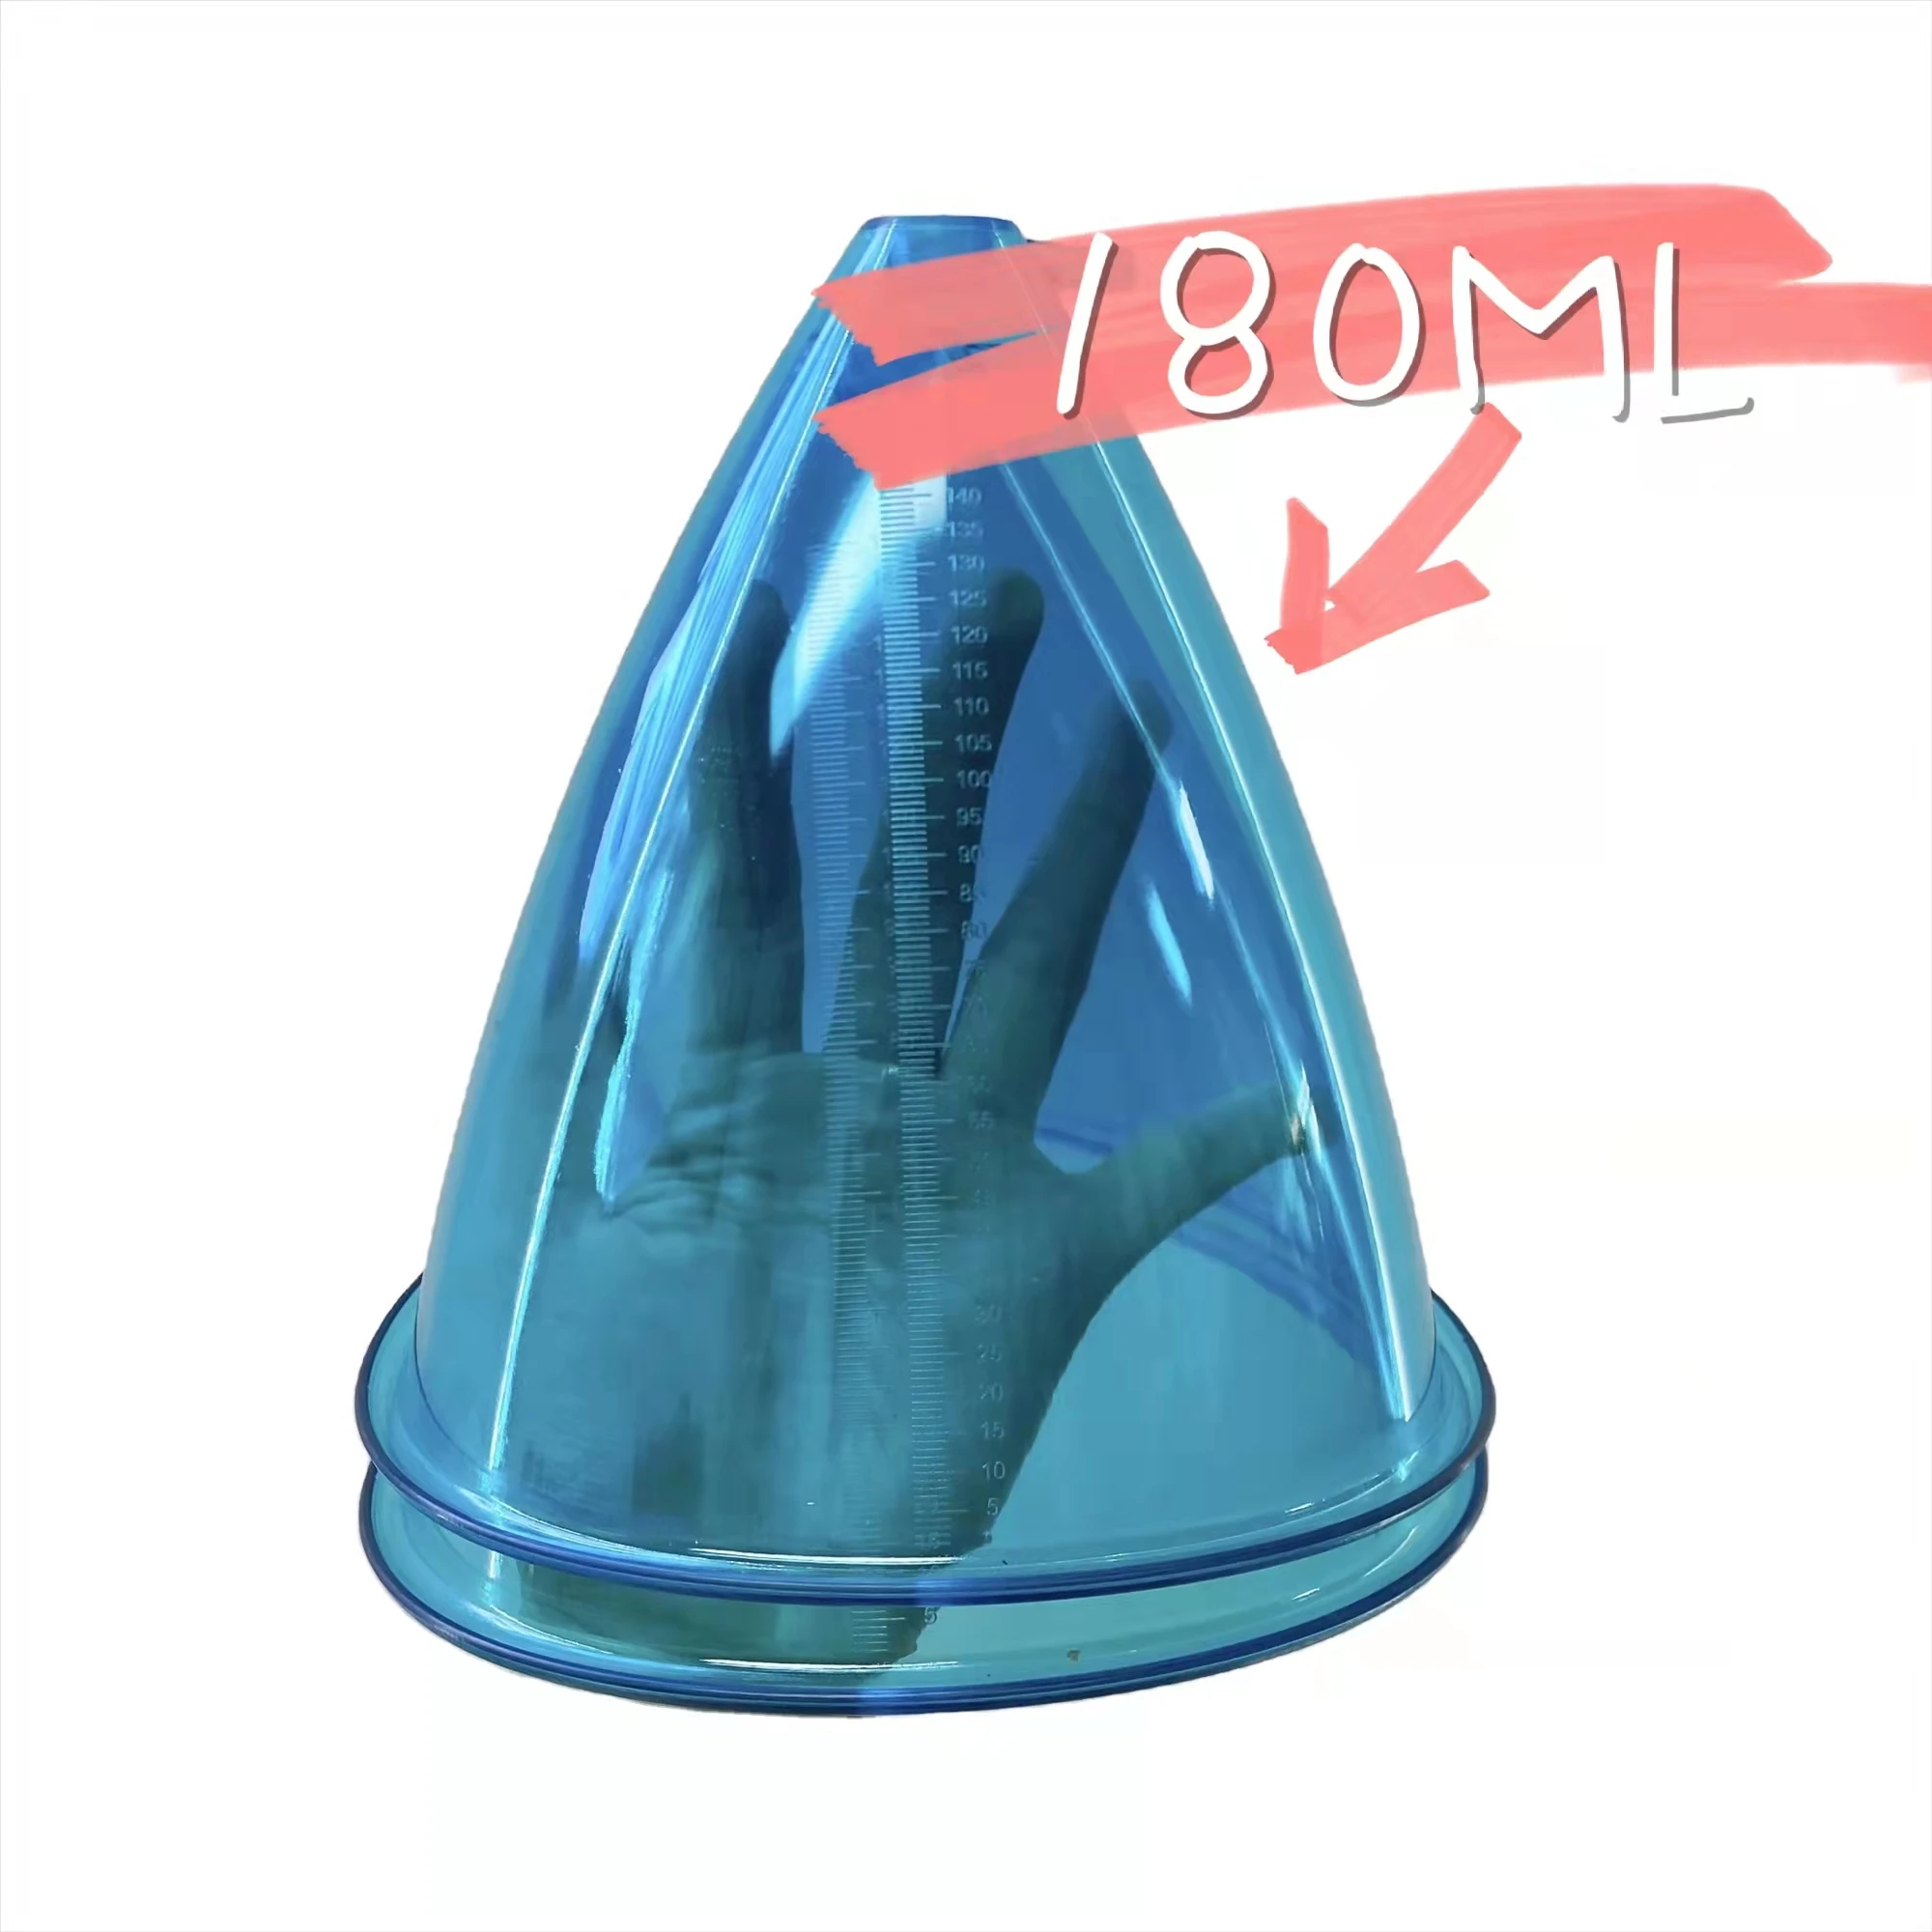 

180ml XXXL 21CM 150ML XL Large Diameter 18.5cm Vacuum Therapy Cups for Breast Enlargement and Butt Lifting Vacuum Suction Cups, Blue